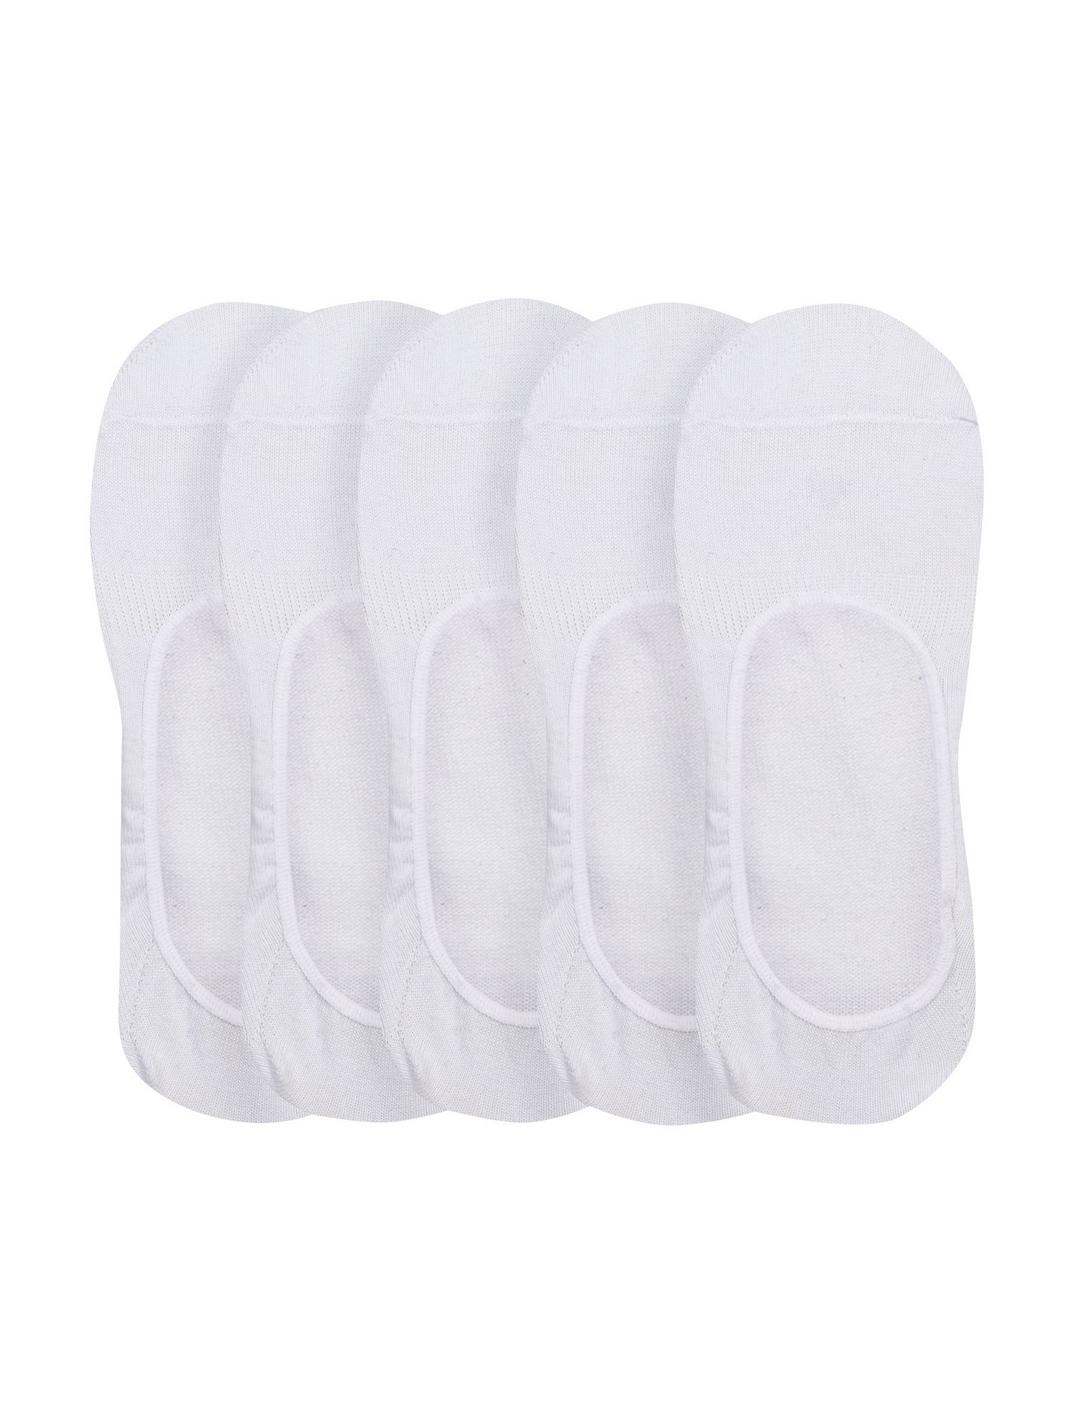 5 Pack White Invisible Socks image number 1